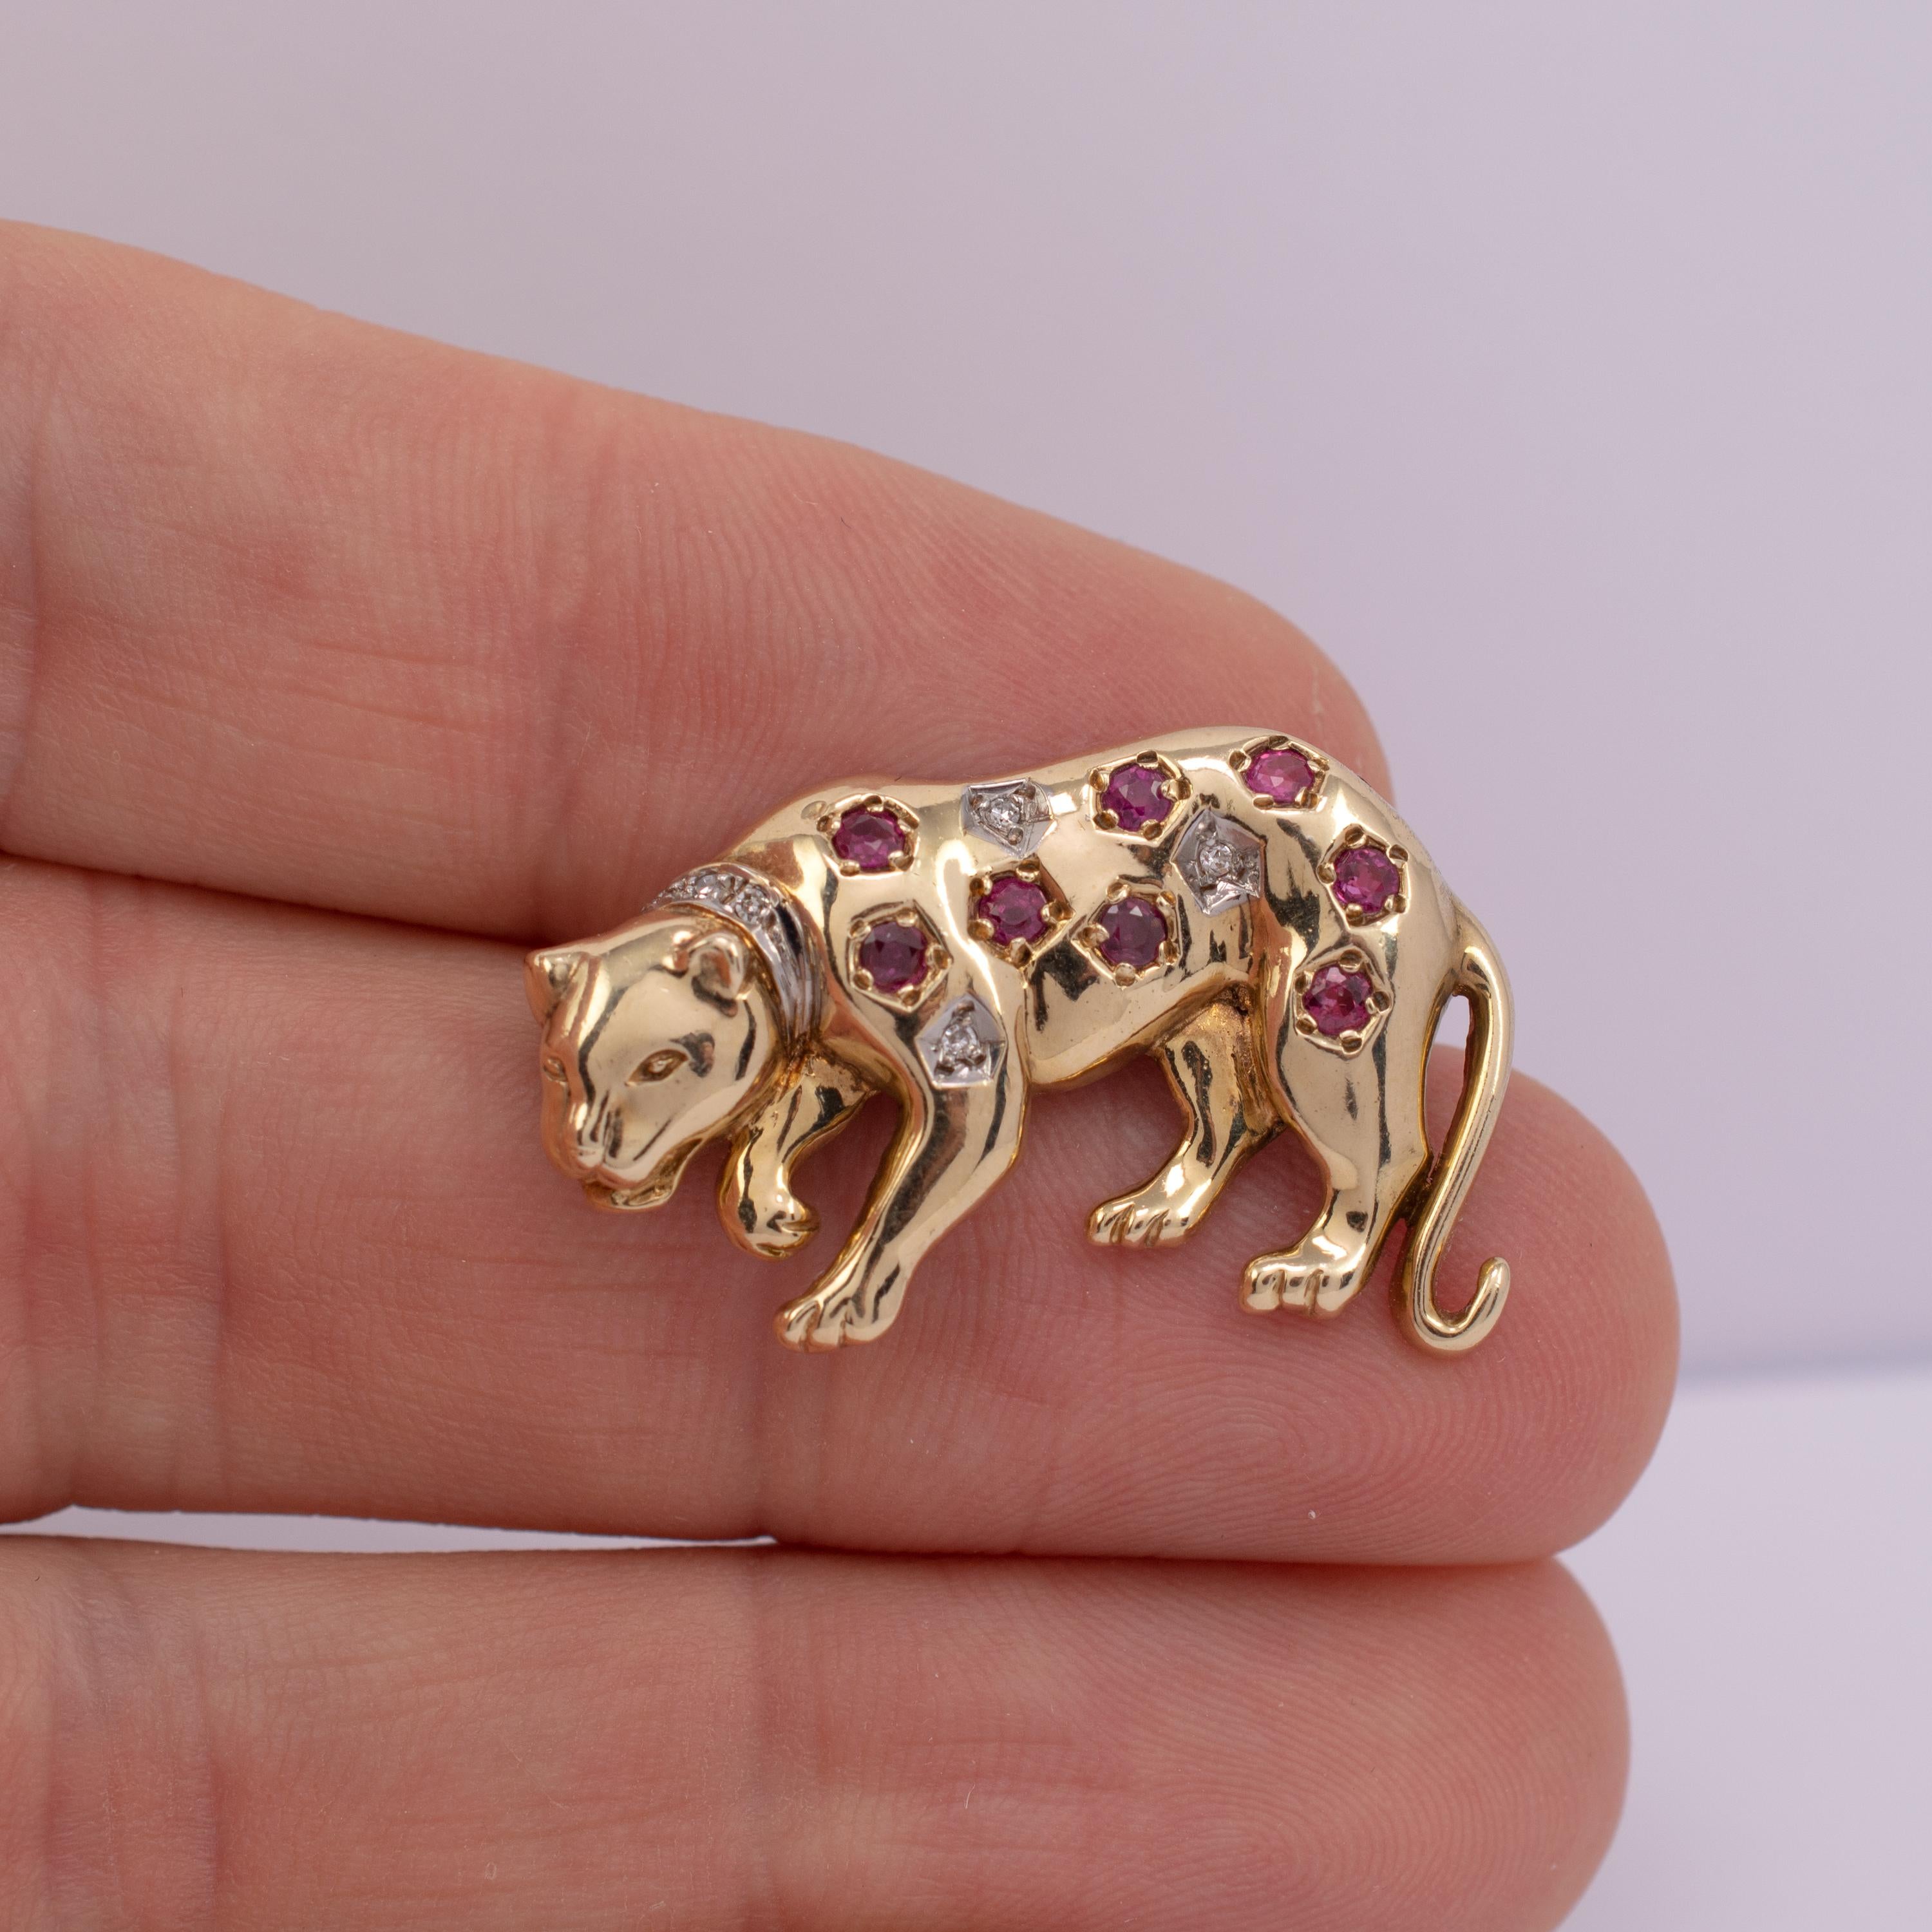 This fabulous 9 karat gold ruby and diamond brooch is modeled as a prowling leapard.

The smooth gold is adorned with 8 round 0.04ct paved set rubies and 3 x 0.03ct round diamonds deep set in white gold hexagons with smaller diamonds set into a